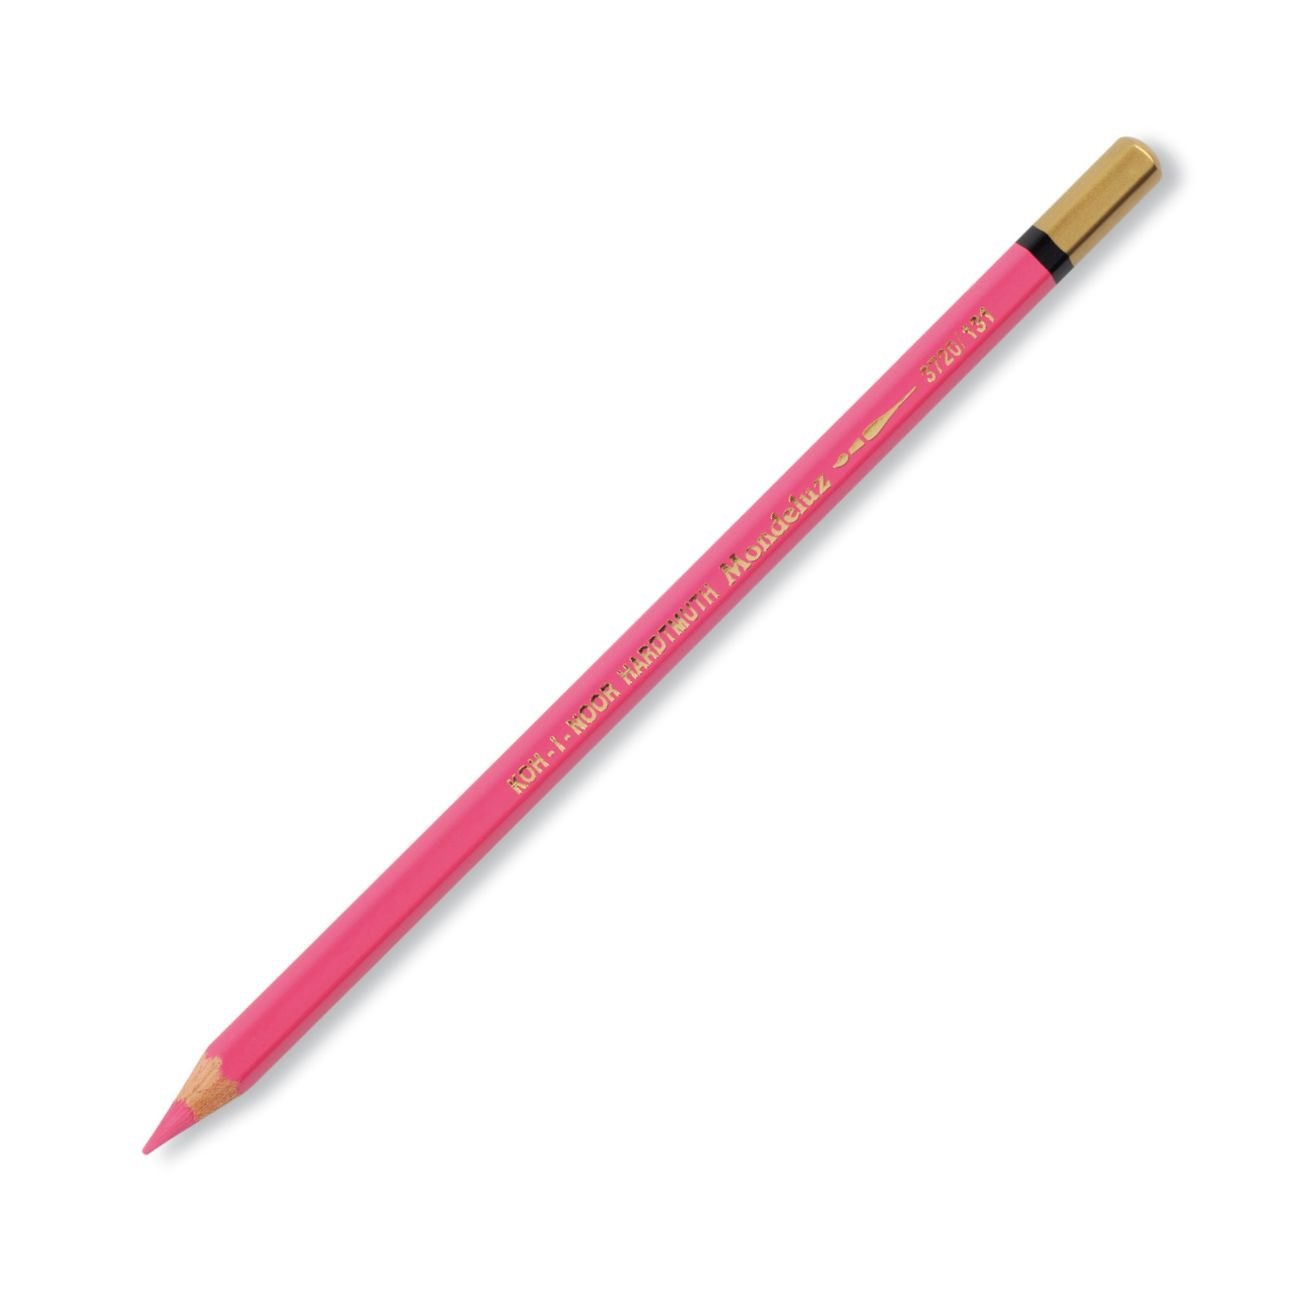 Koh-I-Noor Mondeluz Aquarell Artist's Water Soluble Coloured Pencil - French Pink (131)